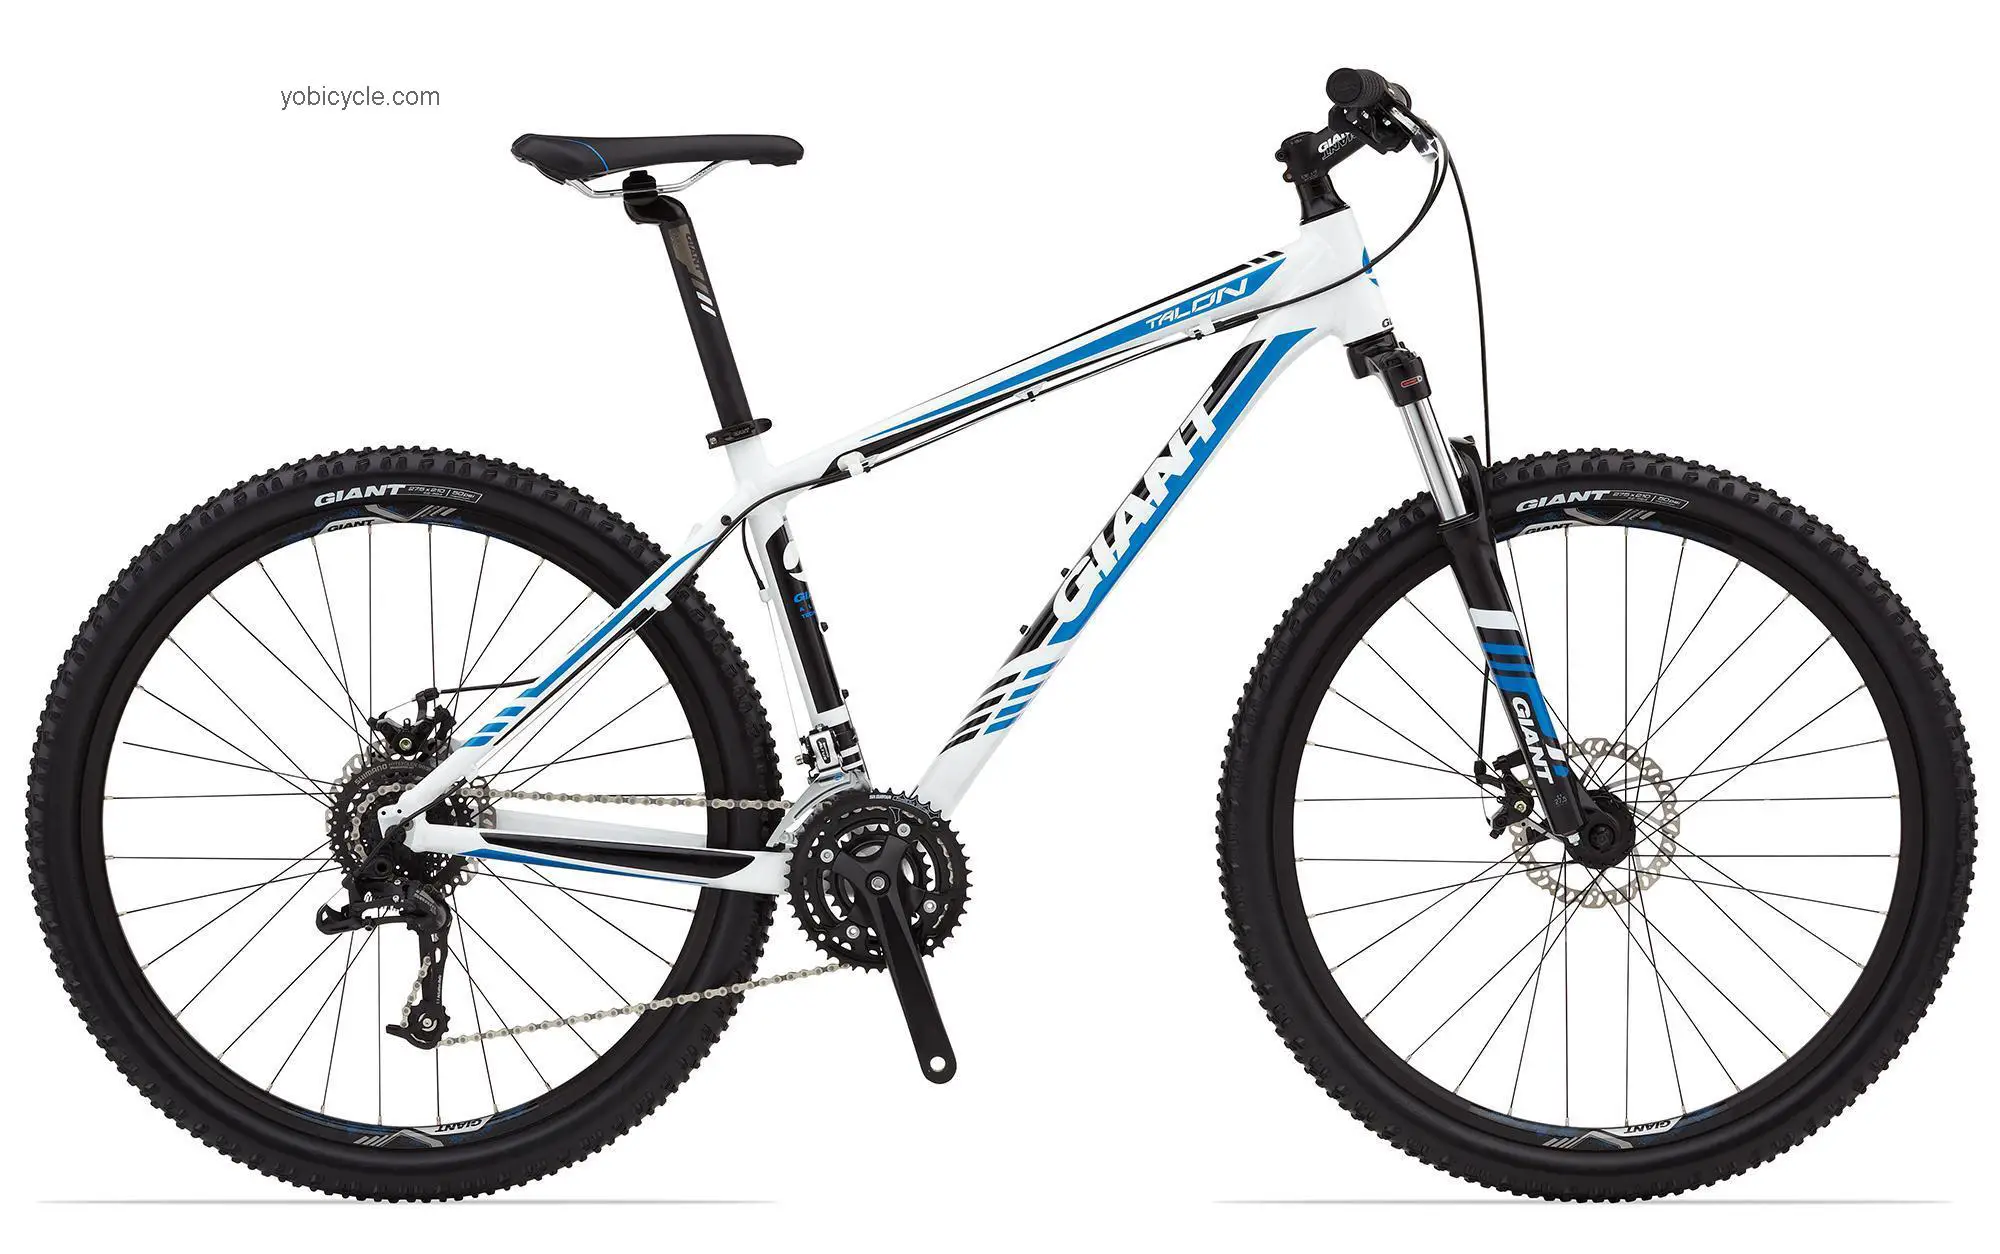 Giant Talon 27.5 5 competitors and comparison tool online specs and performance